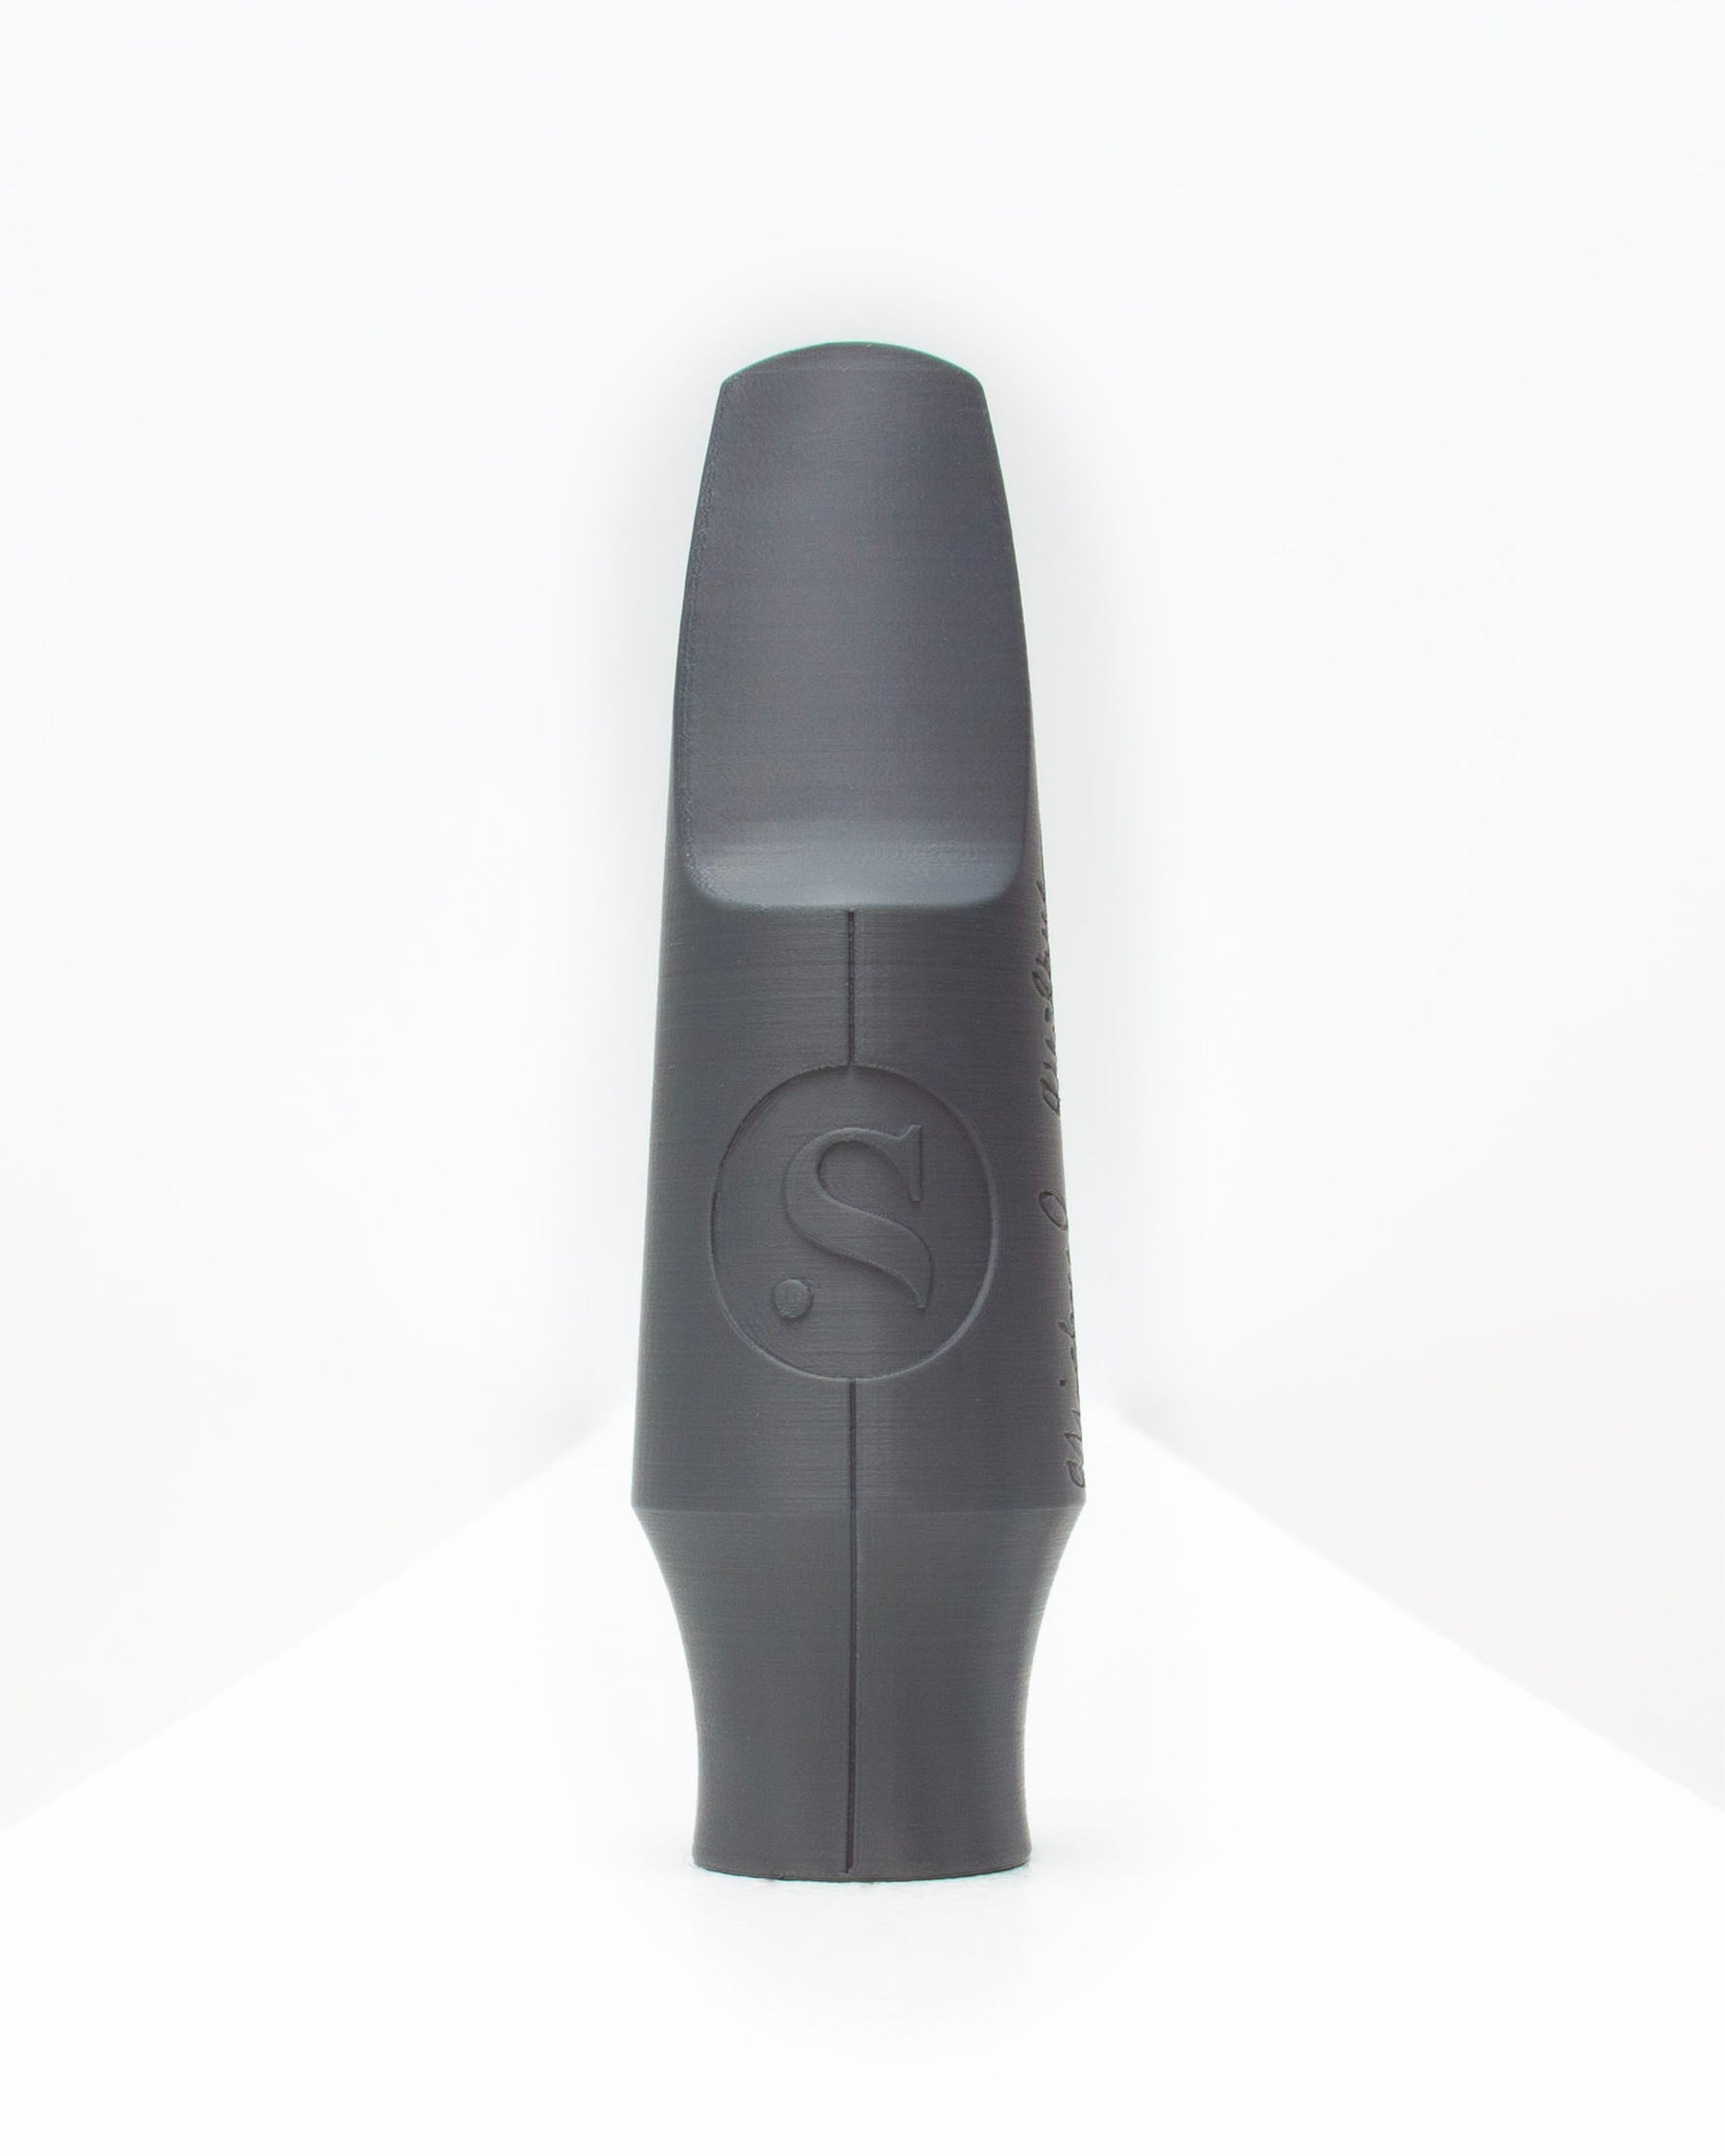 Tenor Originals Saxophone mouthpiece - Steady by Syos - 8 / Anthracite Metal